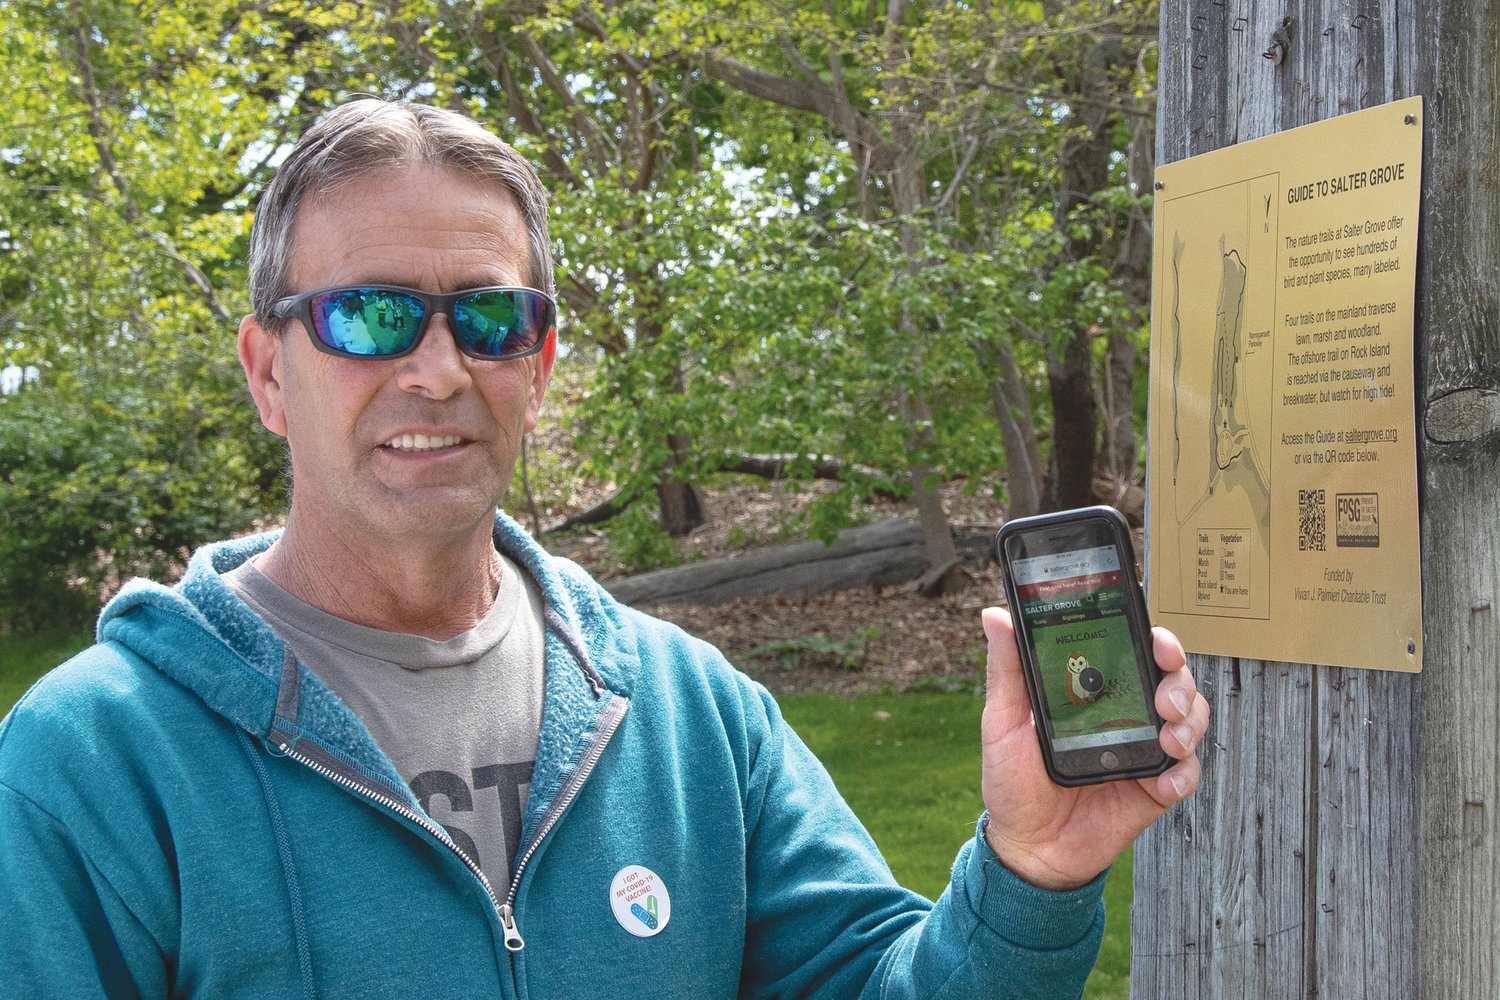 EASY TO USE: Warwick Mayor Frank Picozzi demonstrates how to access the digital guide from your smartphone by using the QR code on the orientation post at the entrance to the park. (Courtesy of Jason Major)